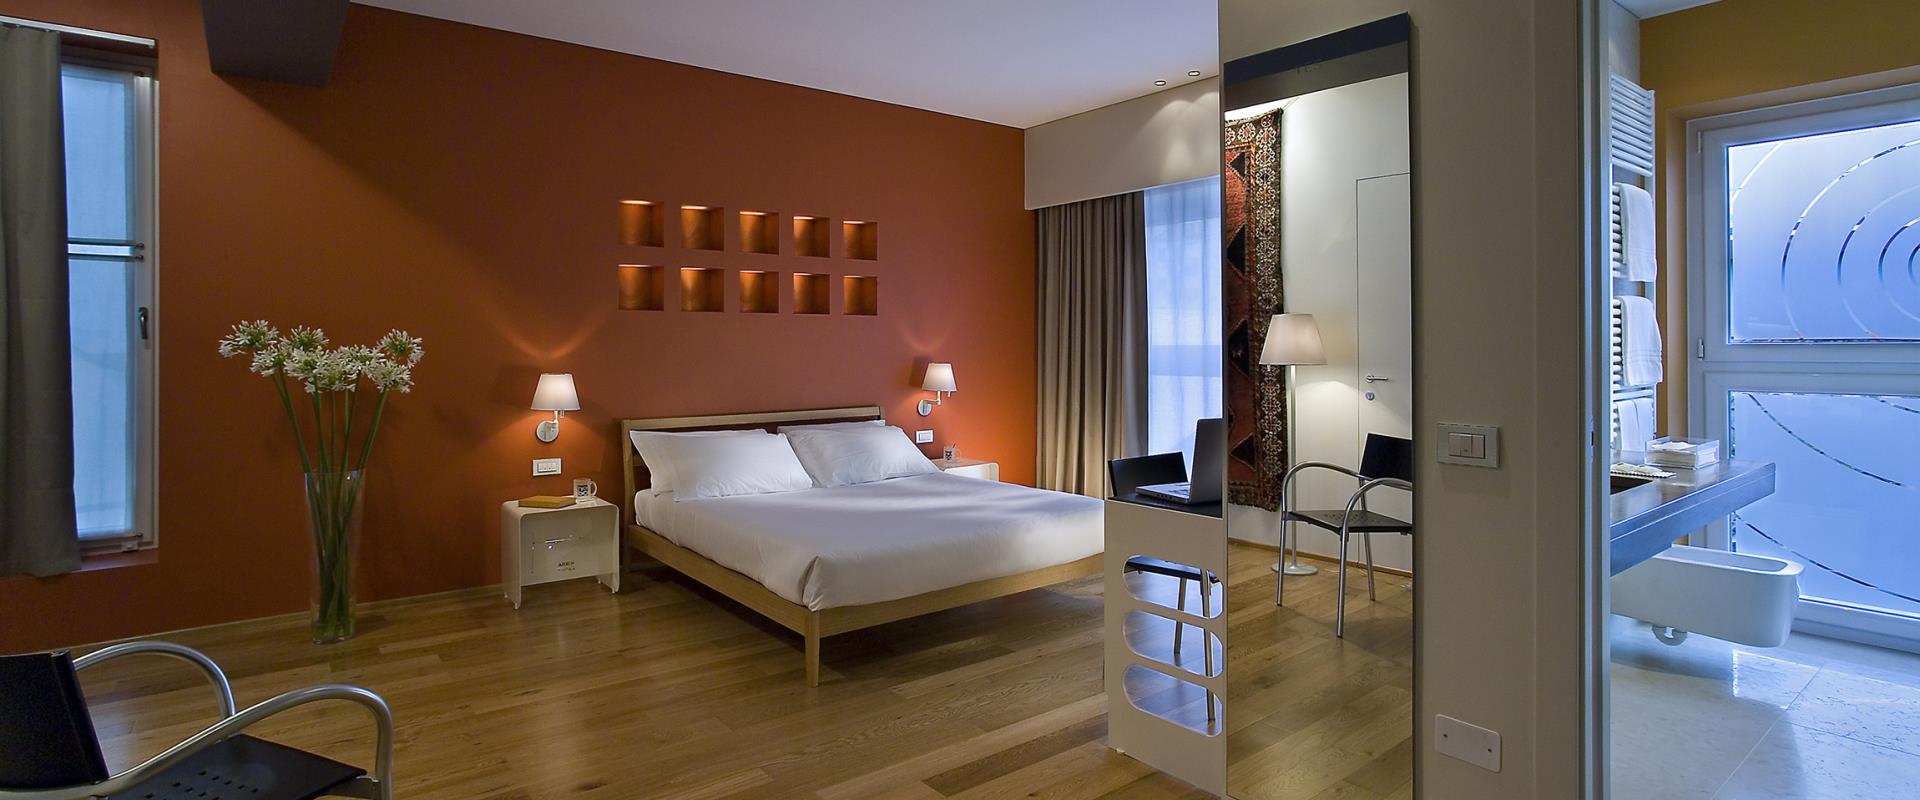 In our Superior rooms you will discover 4-star comforts and facilities and the pleasure of staying close to Venice!